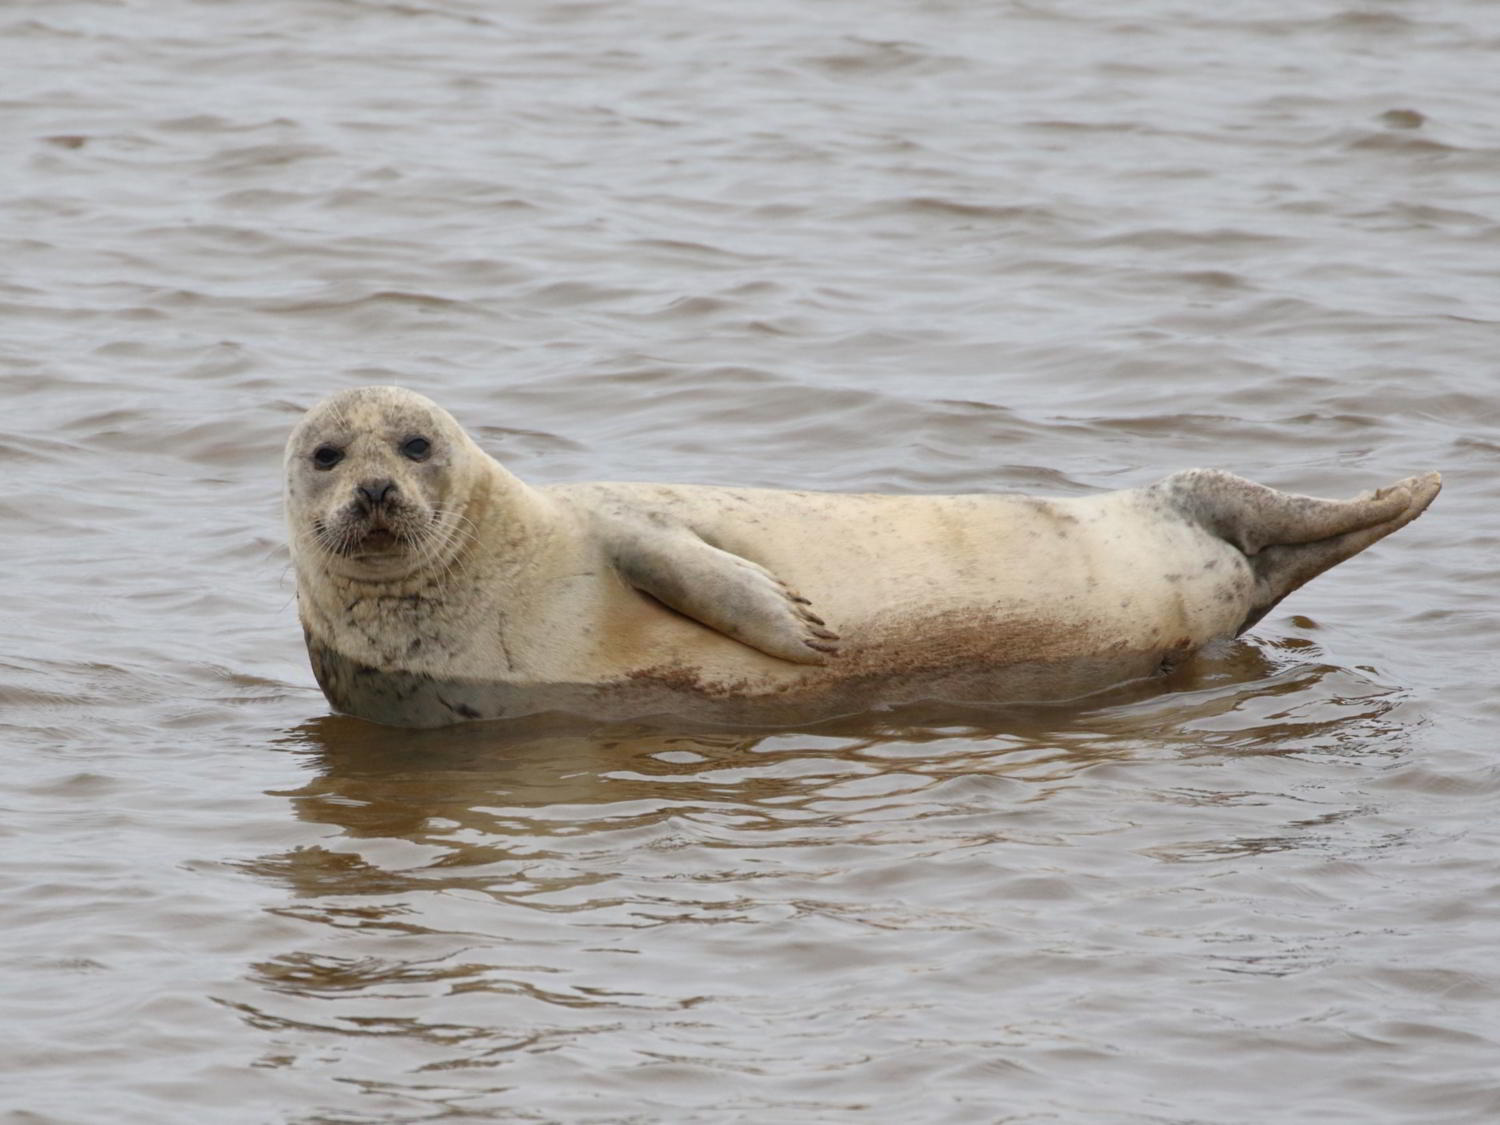 Harbour Seal partially hauled out of the water in Devon